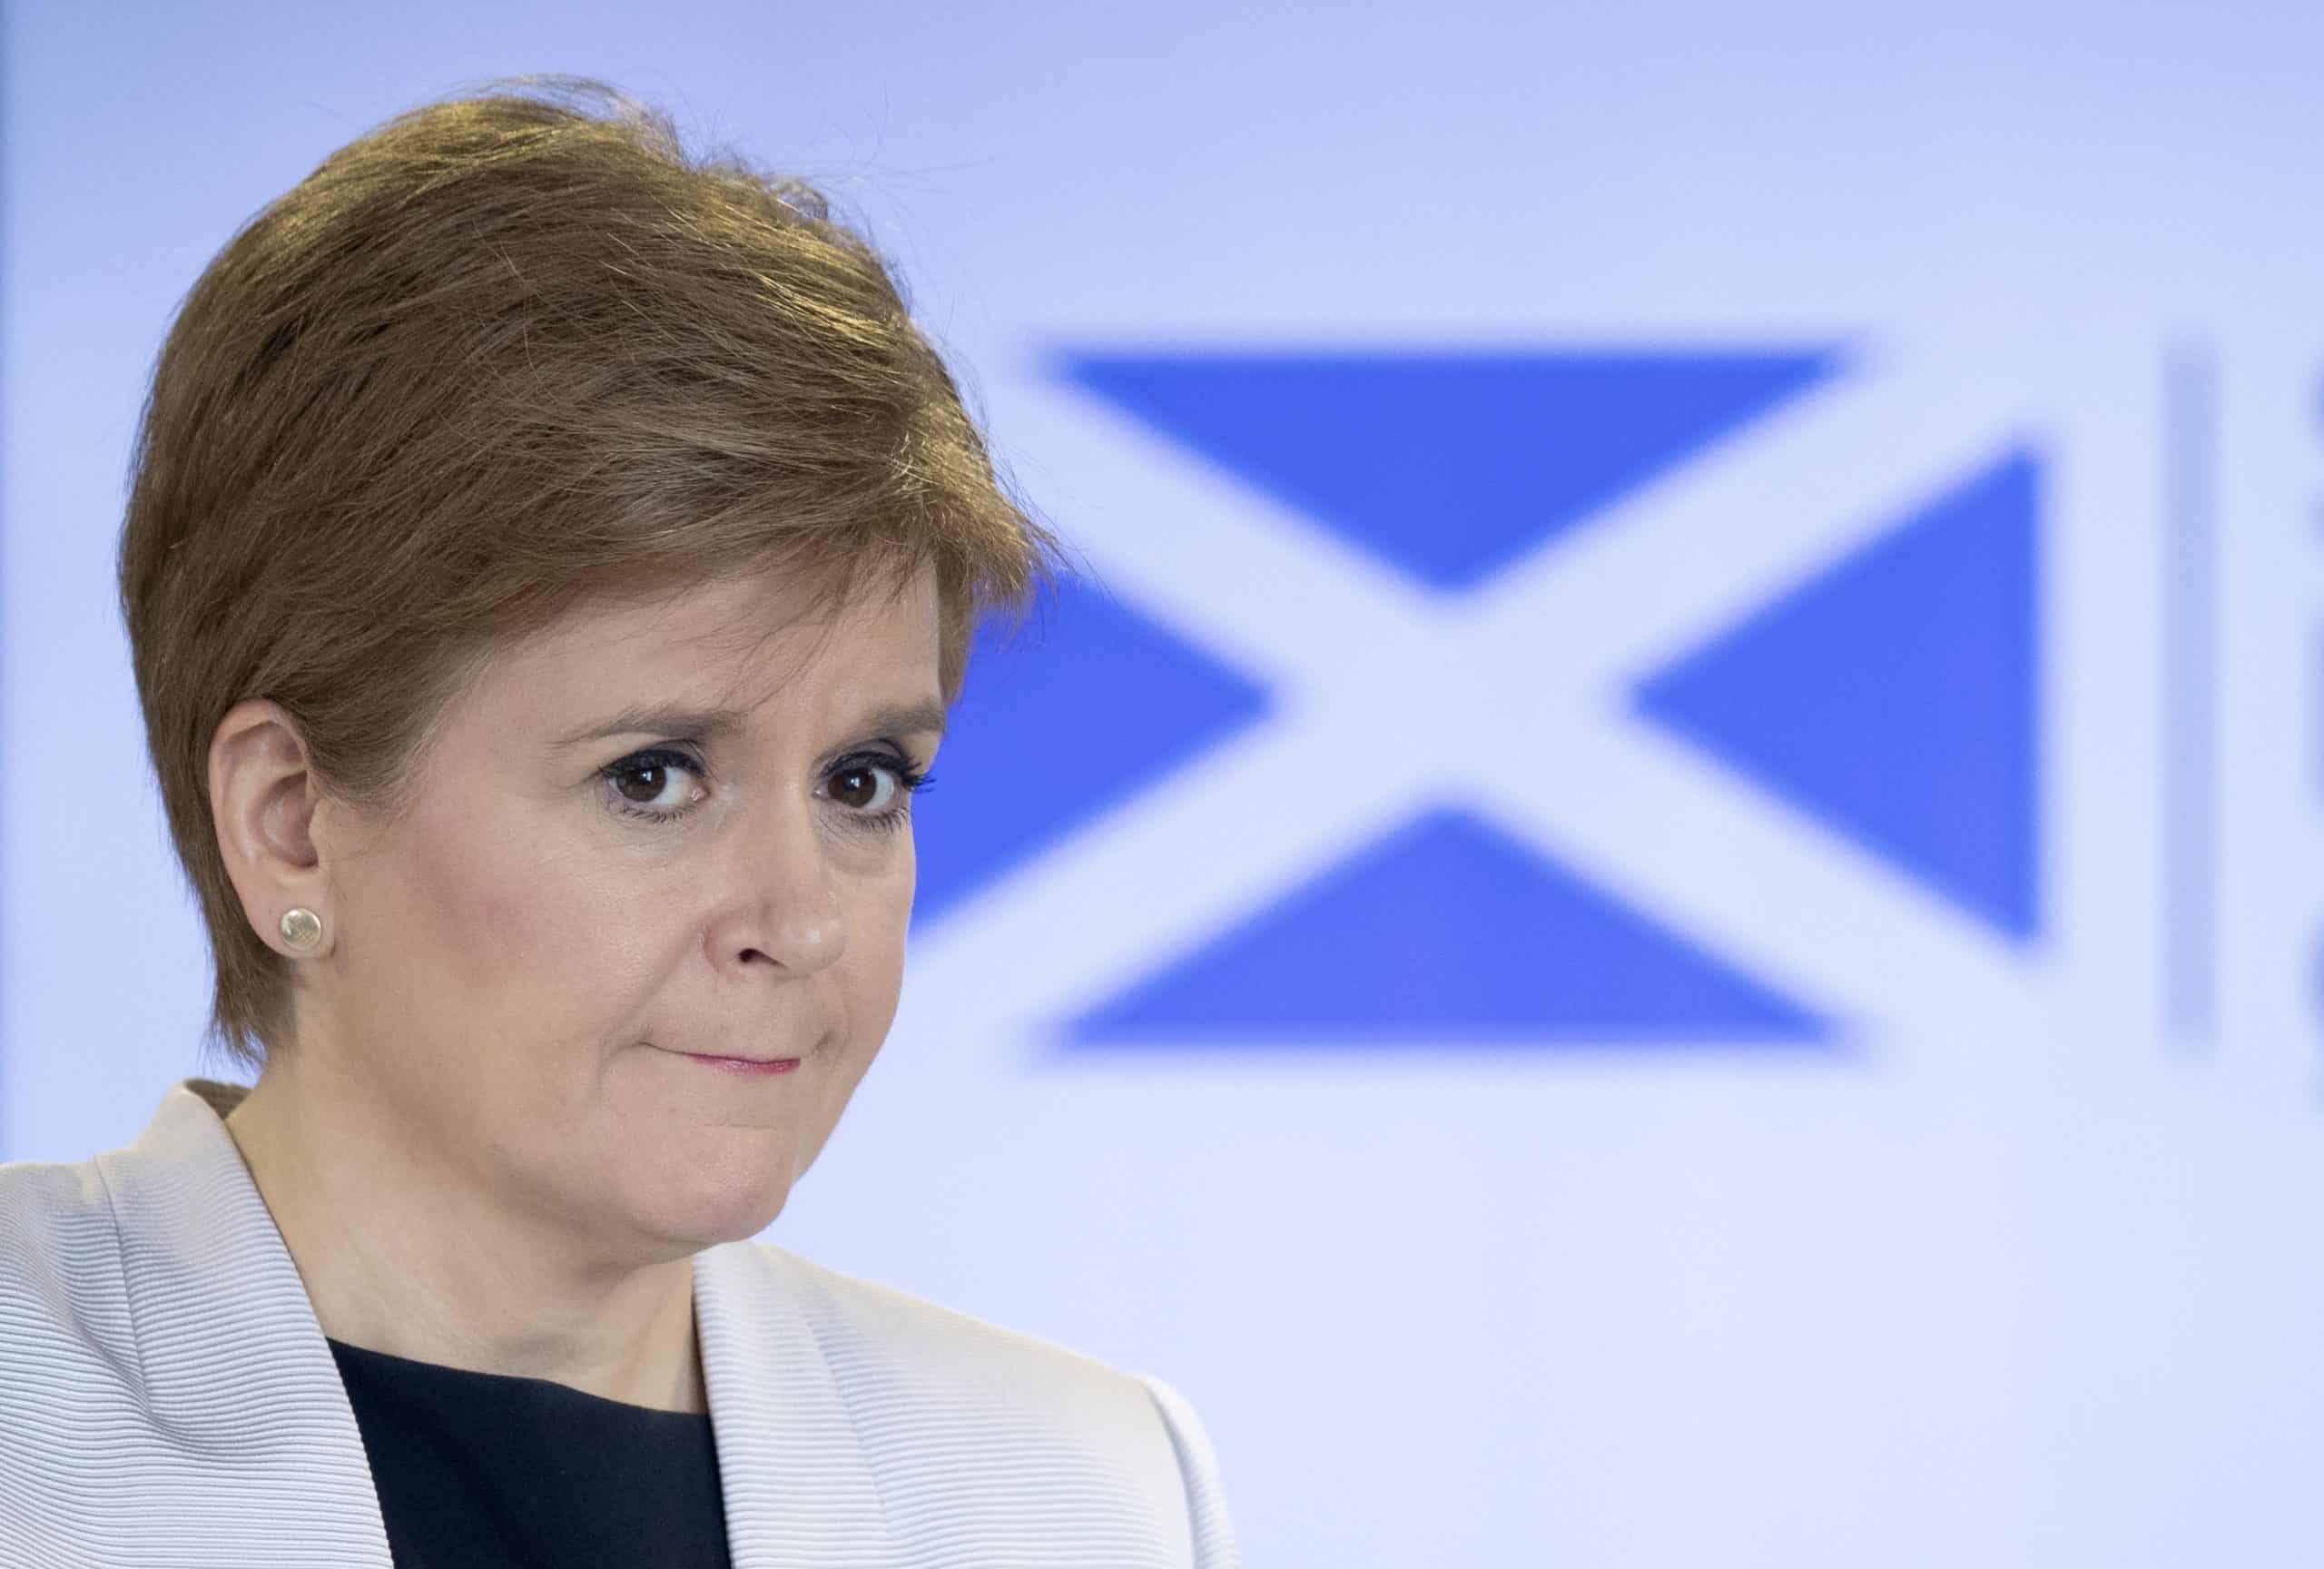 ‘Independence is in sight,’ Sturgeon tells SNP conference